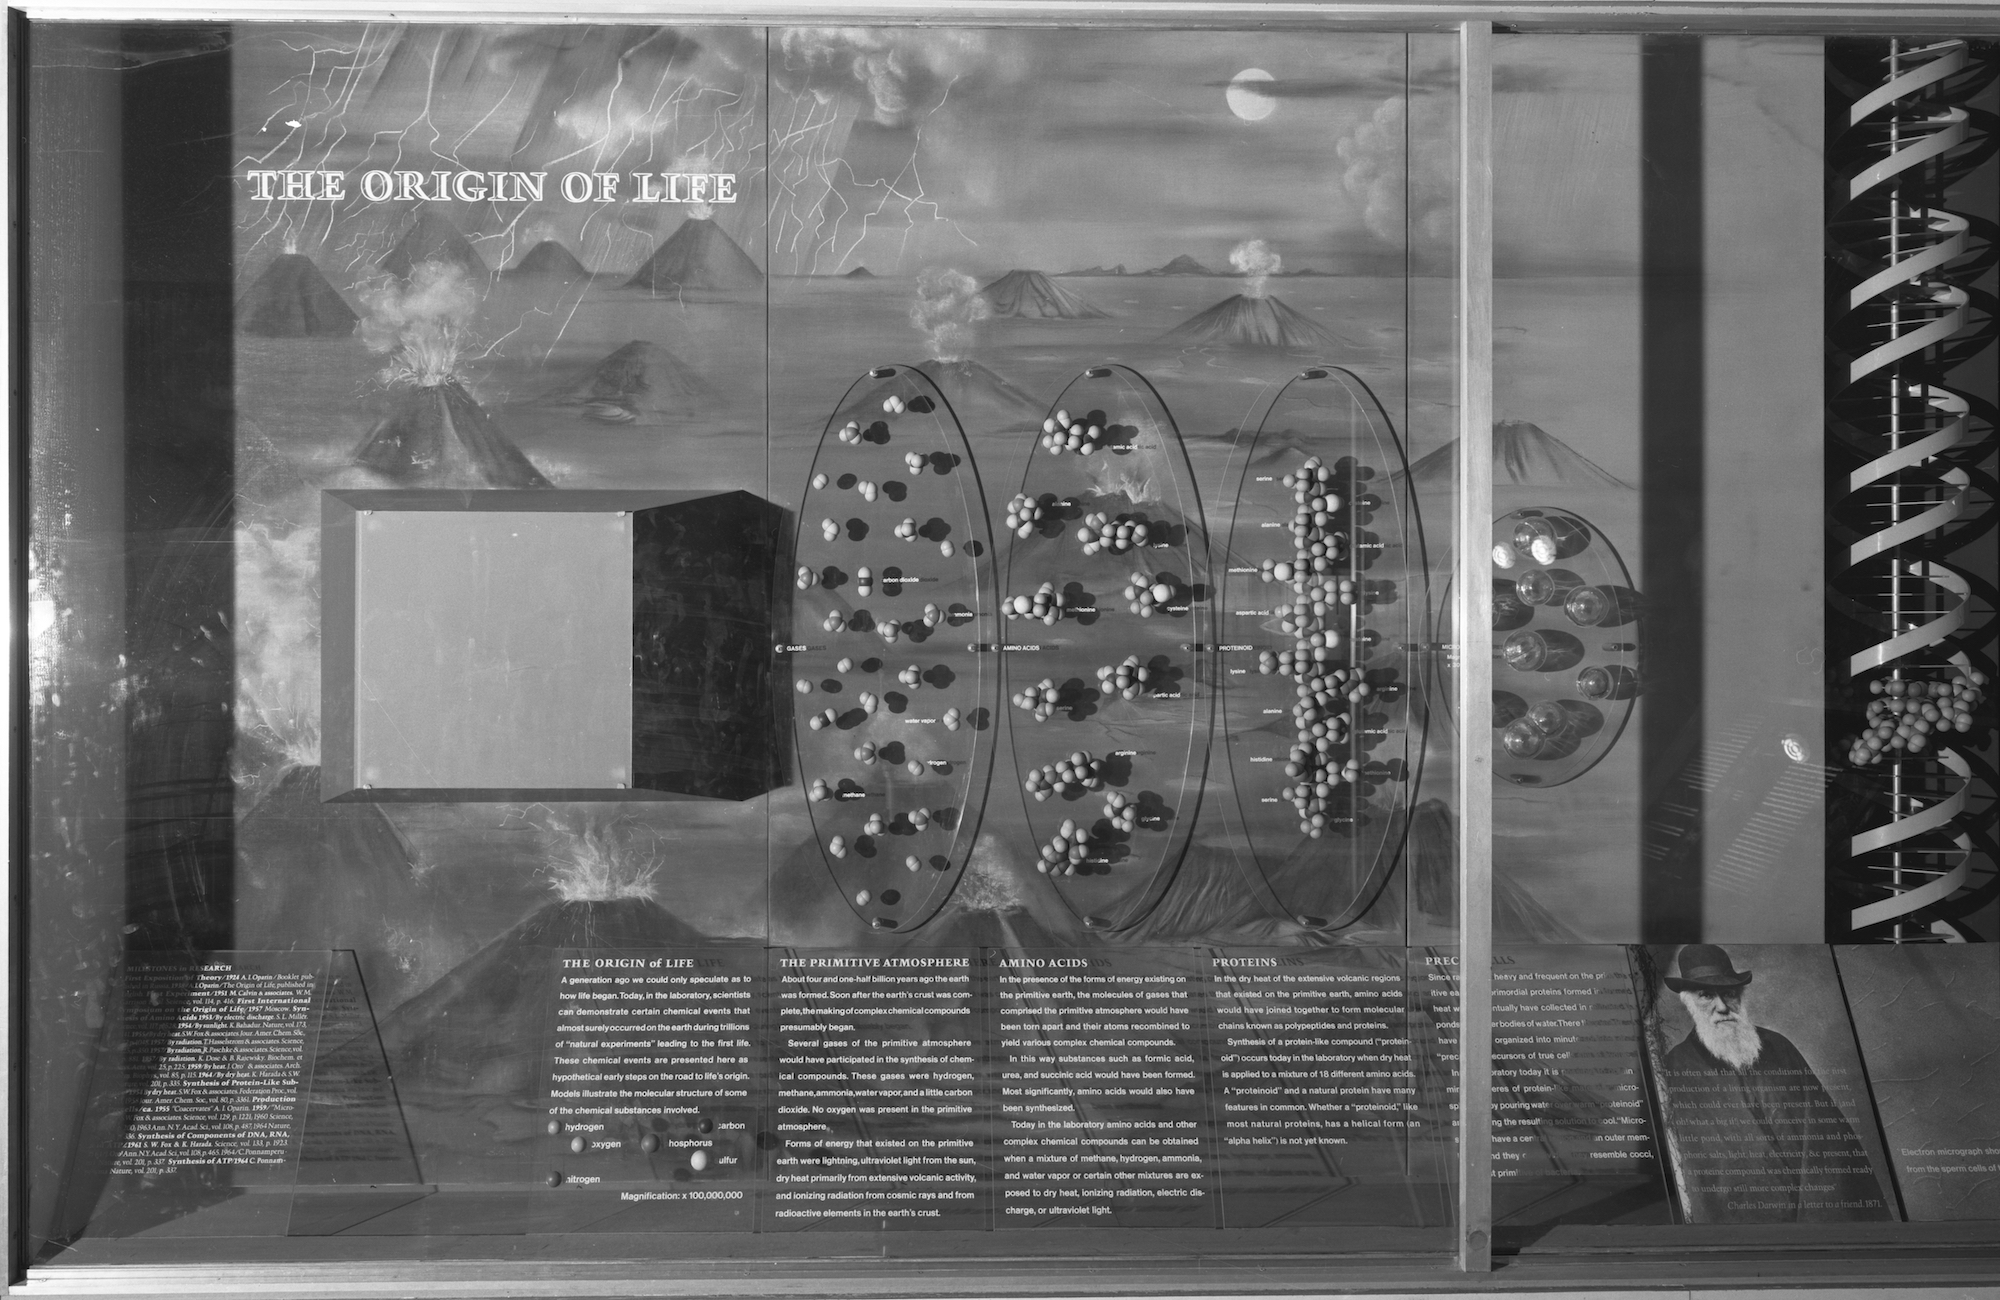 Charles Alston's Origin of Life Mural in the background of an exhibition case with text and models of molecules.